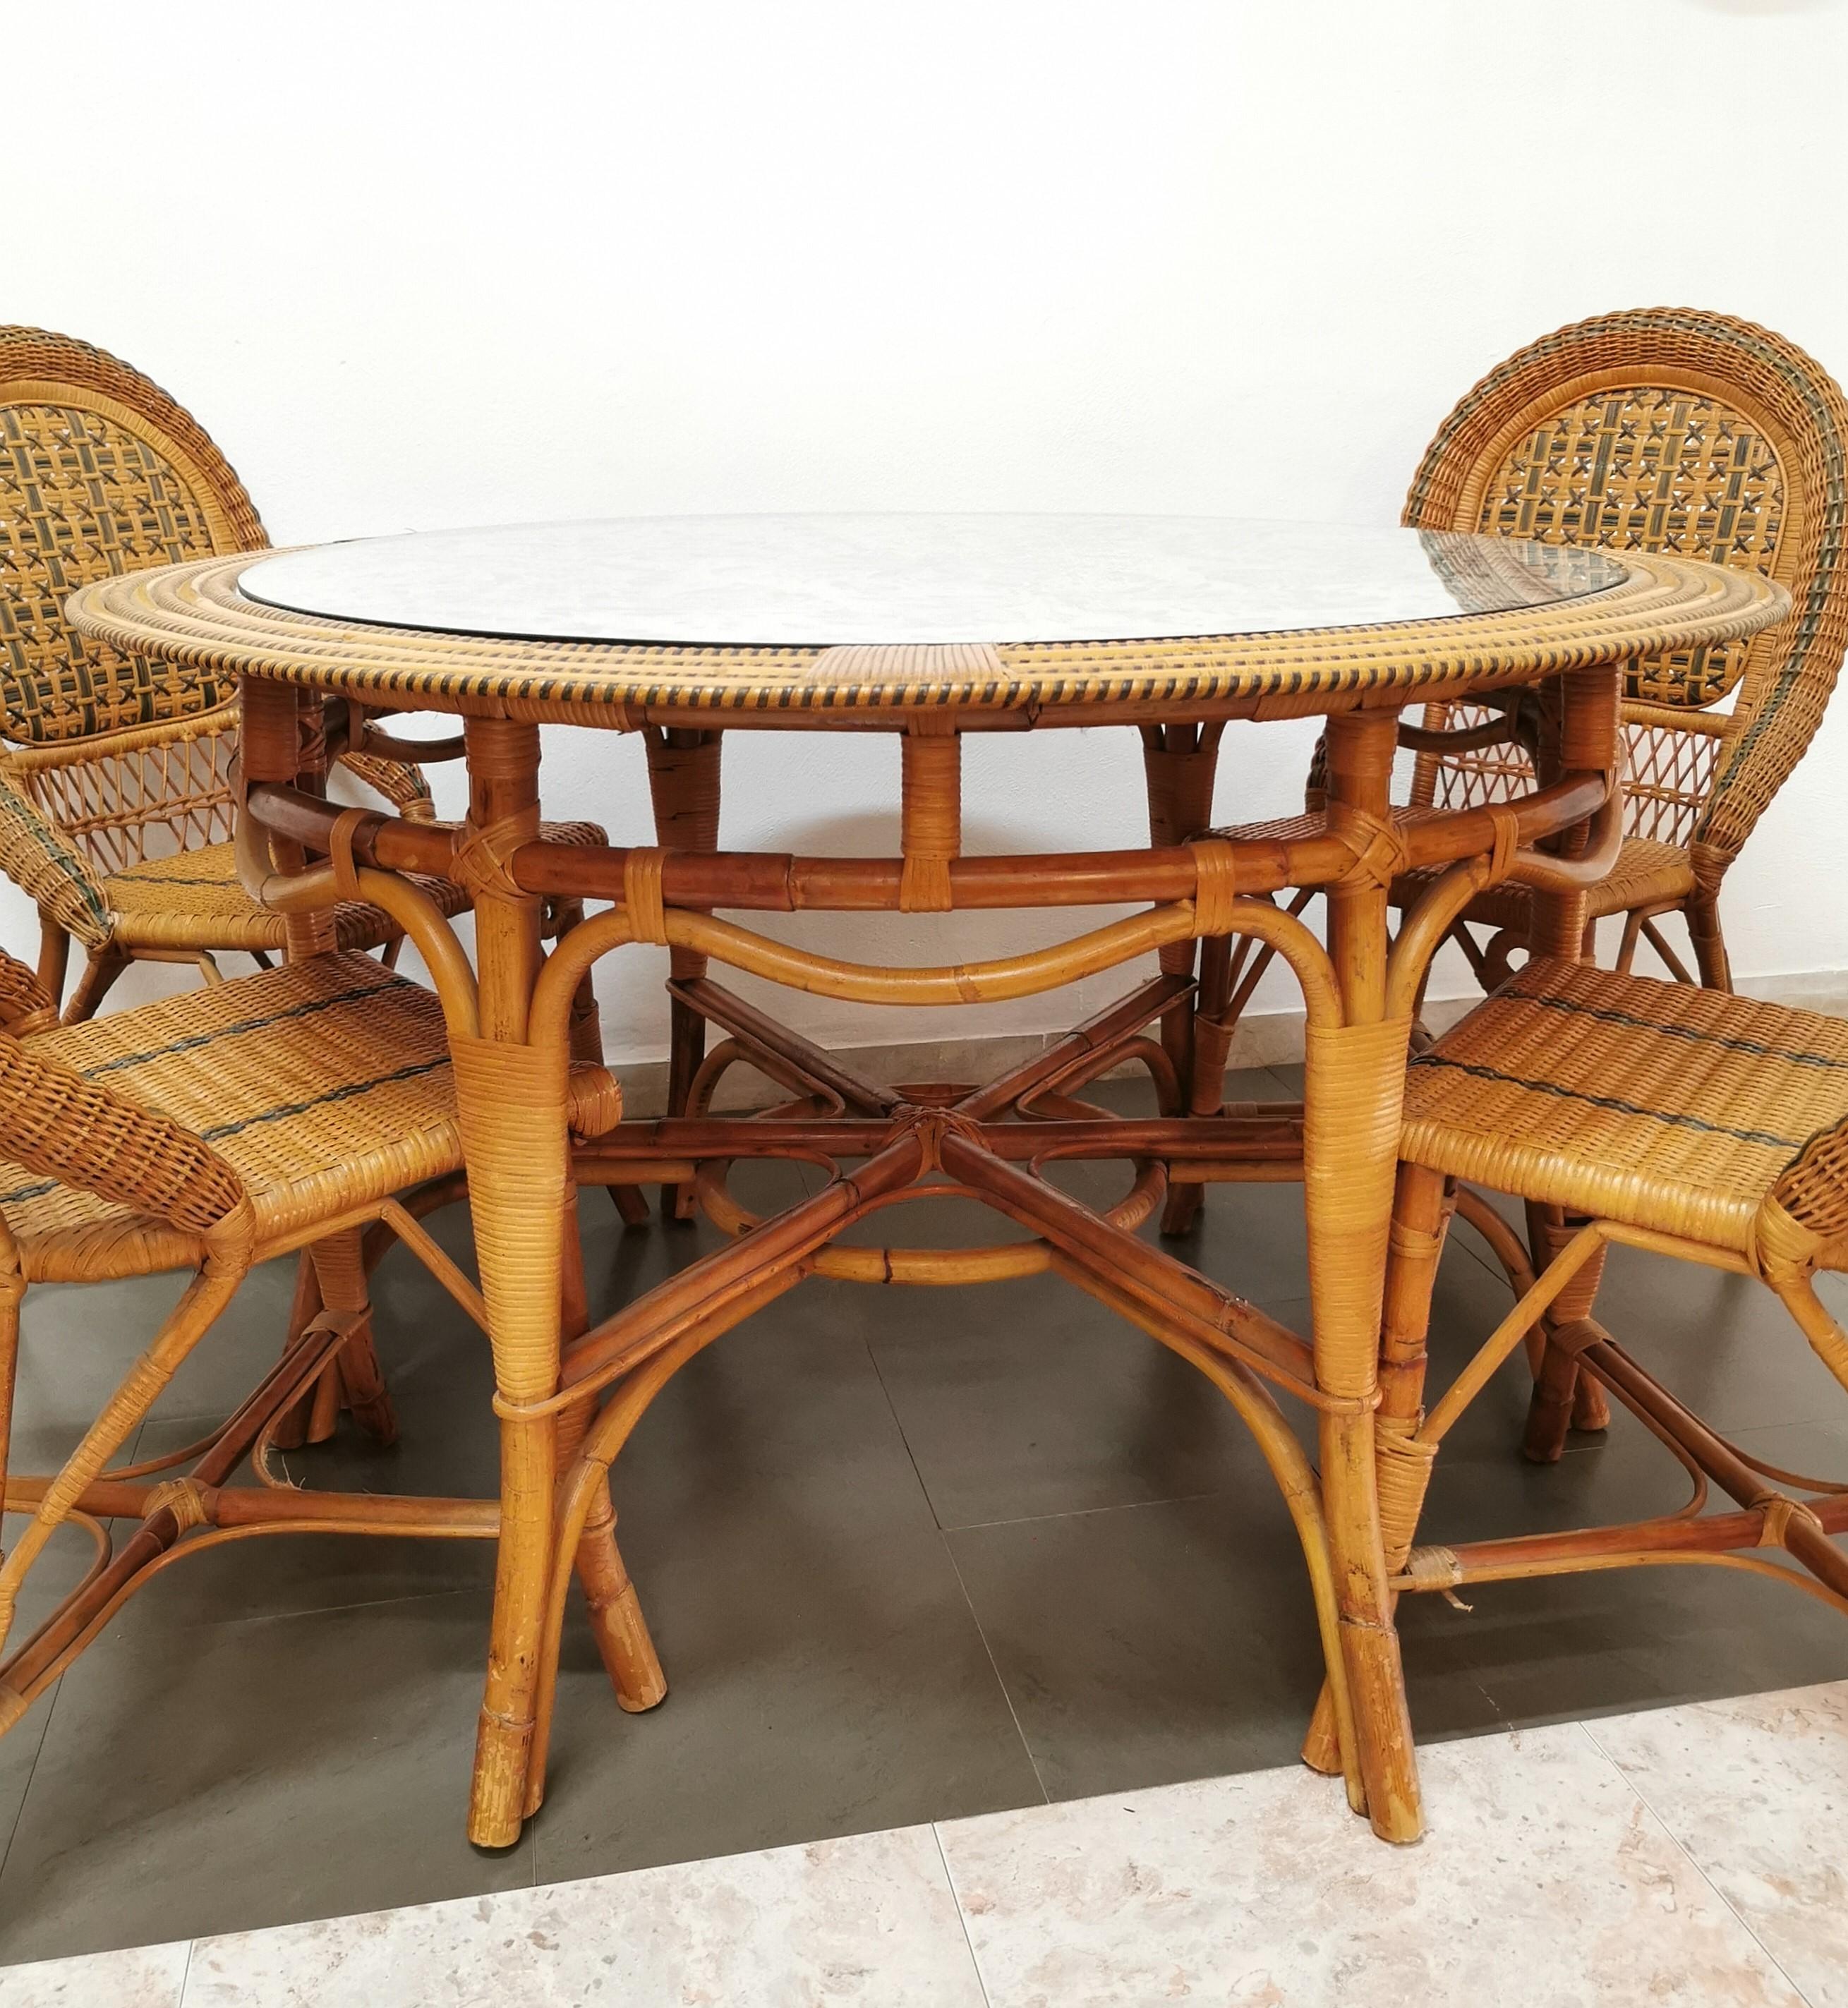 20th Century Dining Room Chairs Table Rattan Bamboo Fabric Glass Vivai del Sud 1980s Set of 5